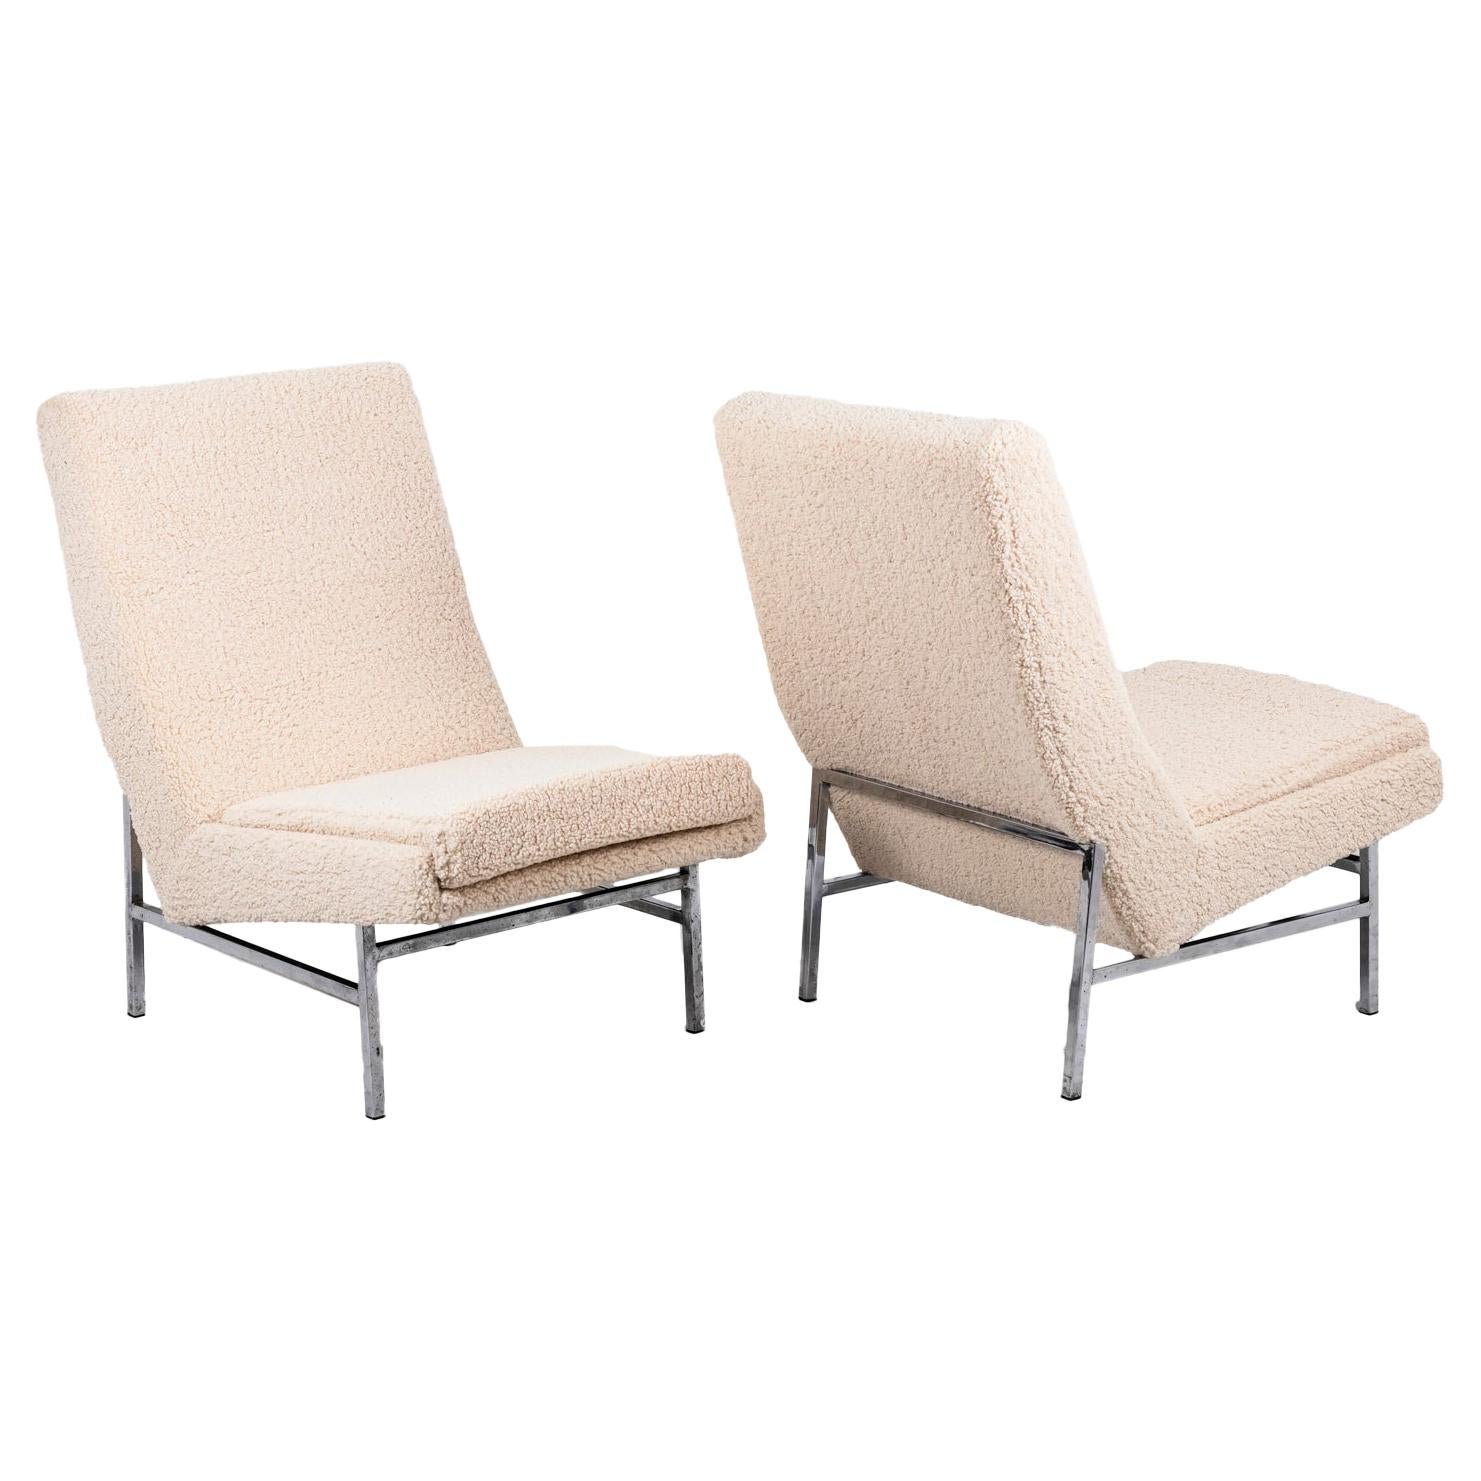 ARP Pour Steiner, Pair of Armchairs in Chromed Metal, 1950s